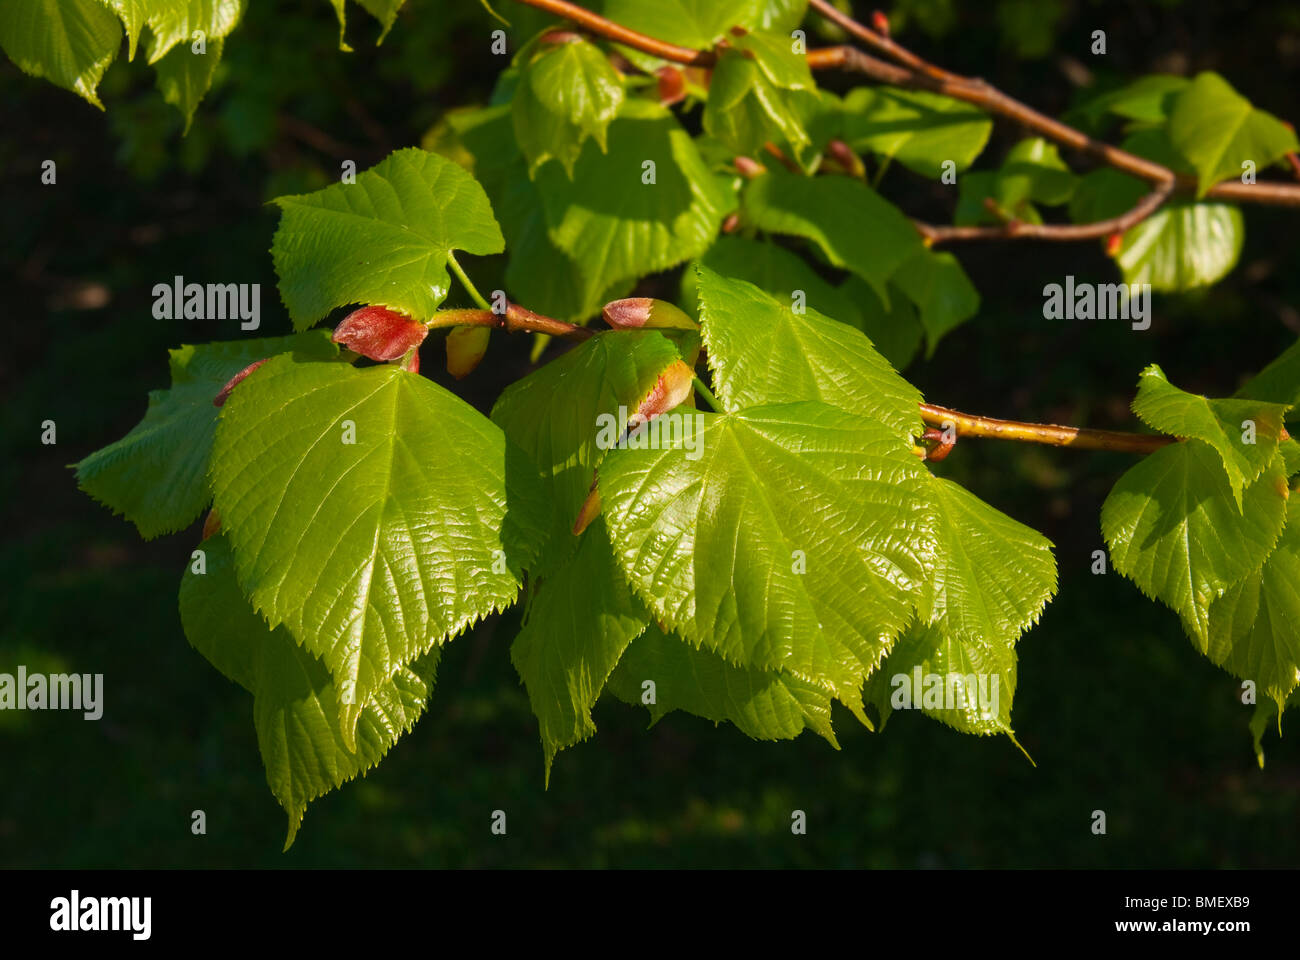 Leaves of Small leaved Lime tree Stock Photo